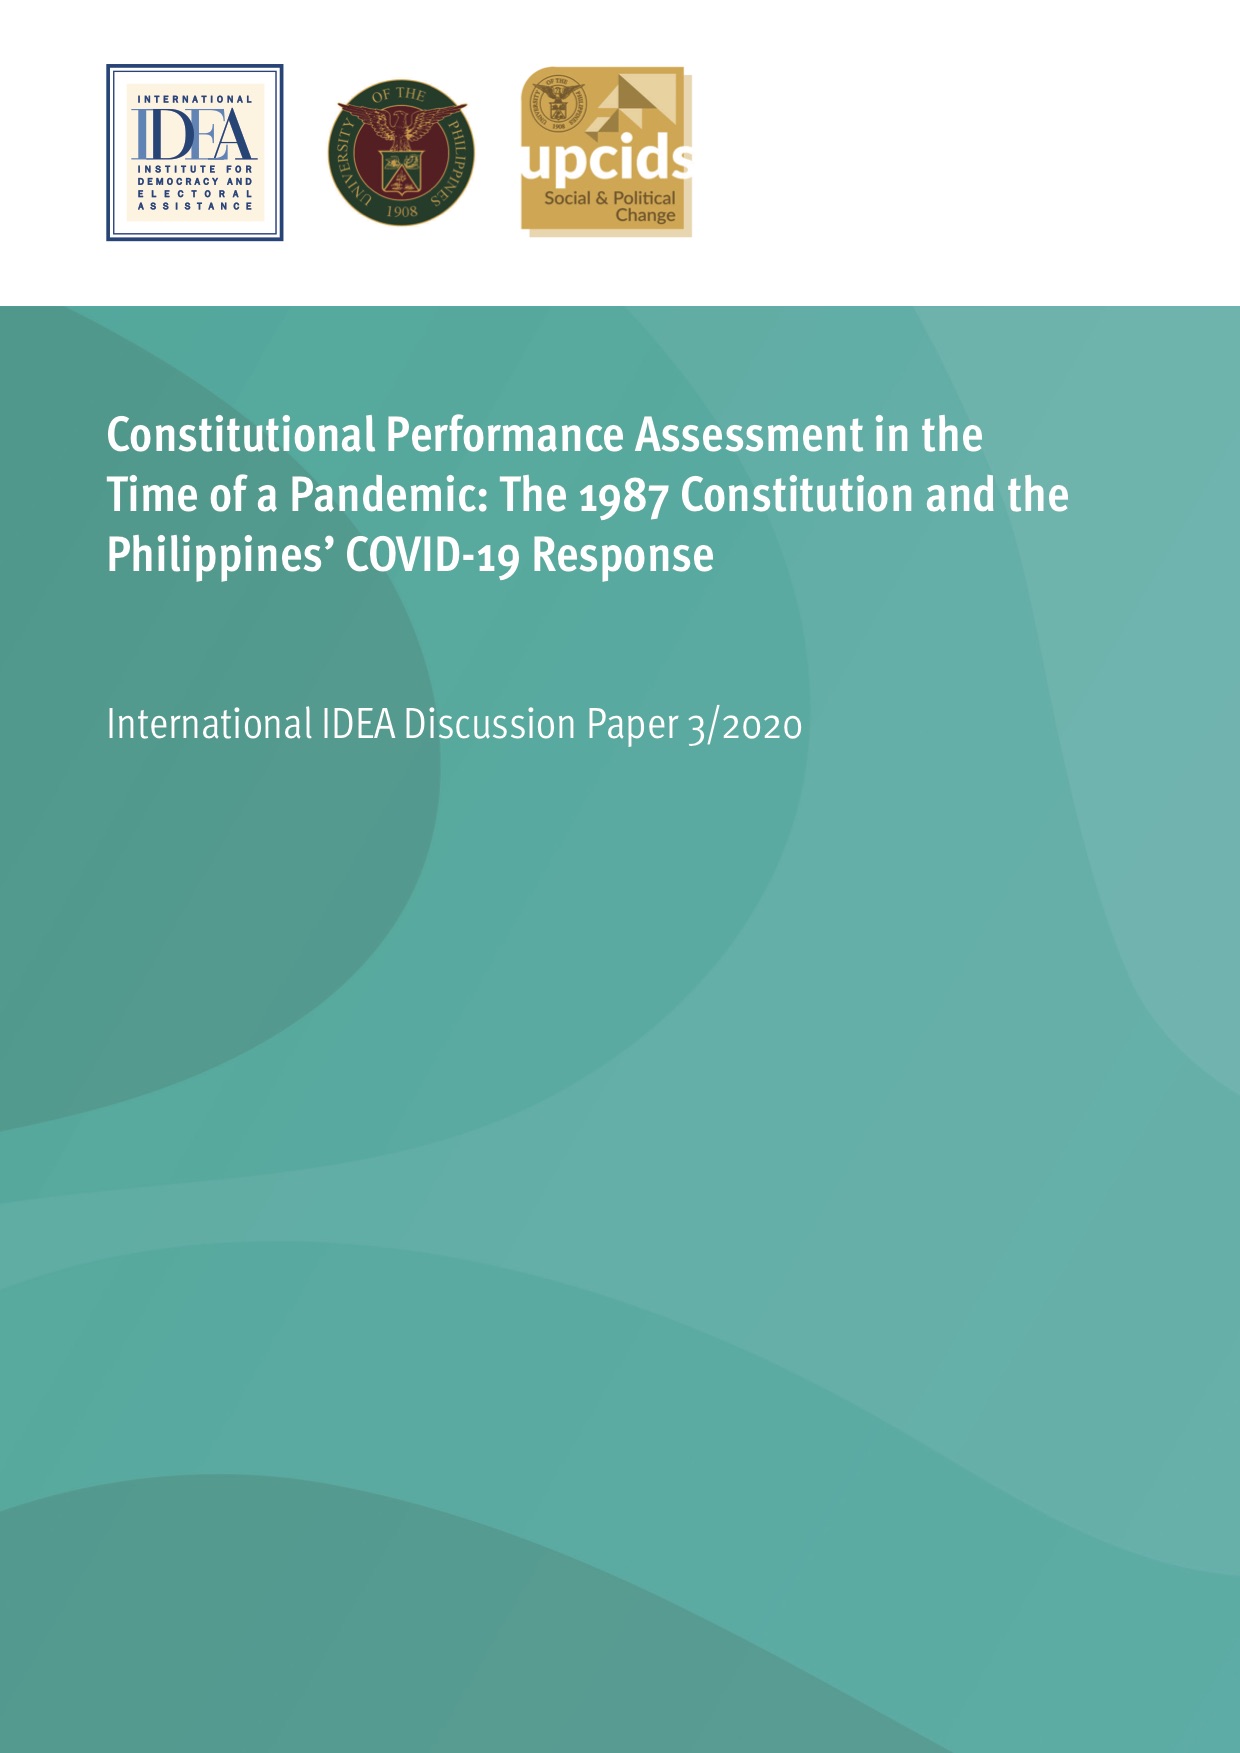 Constitutional Performance Assessment in the Time of a Pandemic: The 1987 Constitution and the Philippines' COVID-19 Response